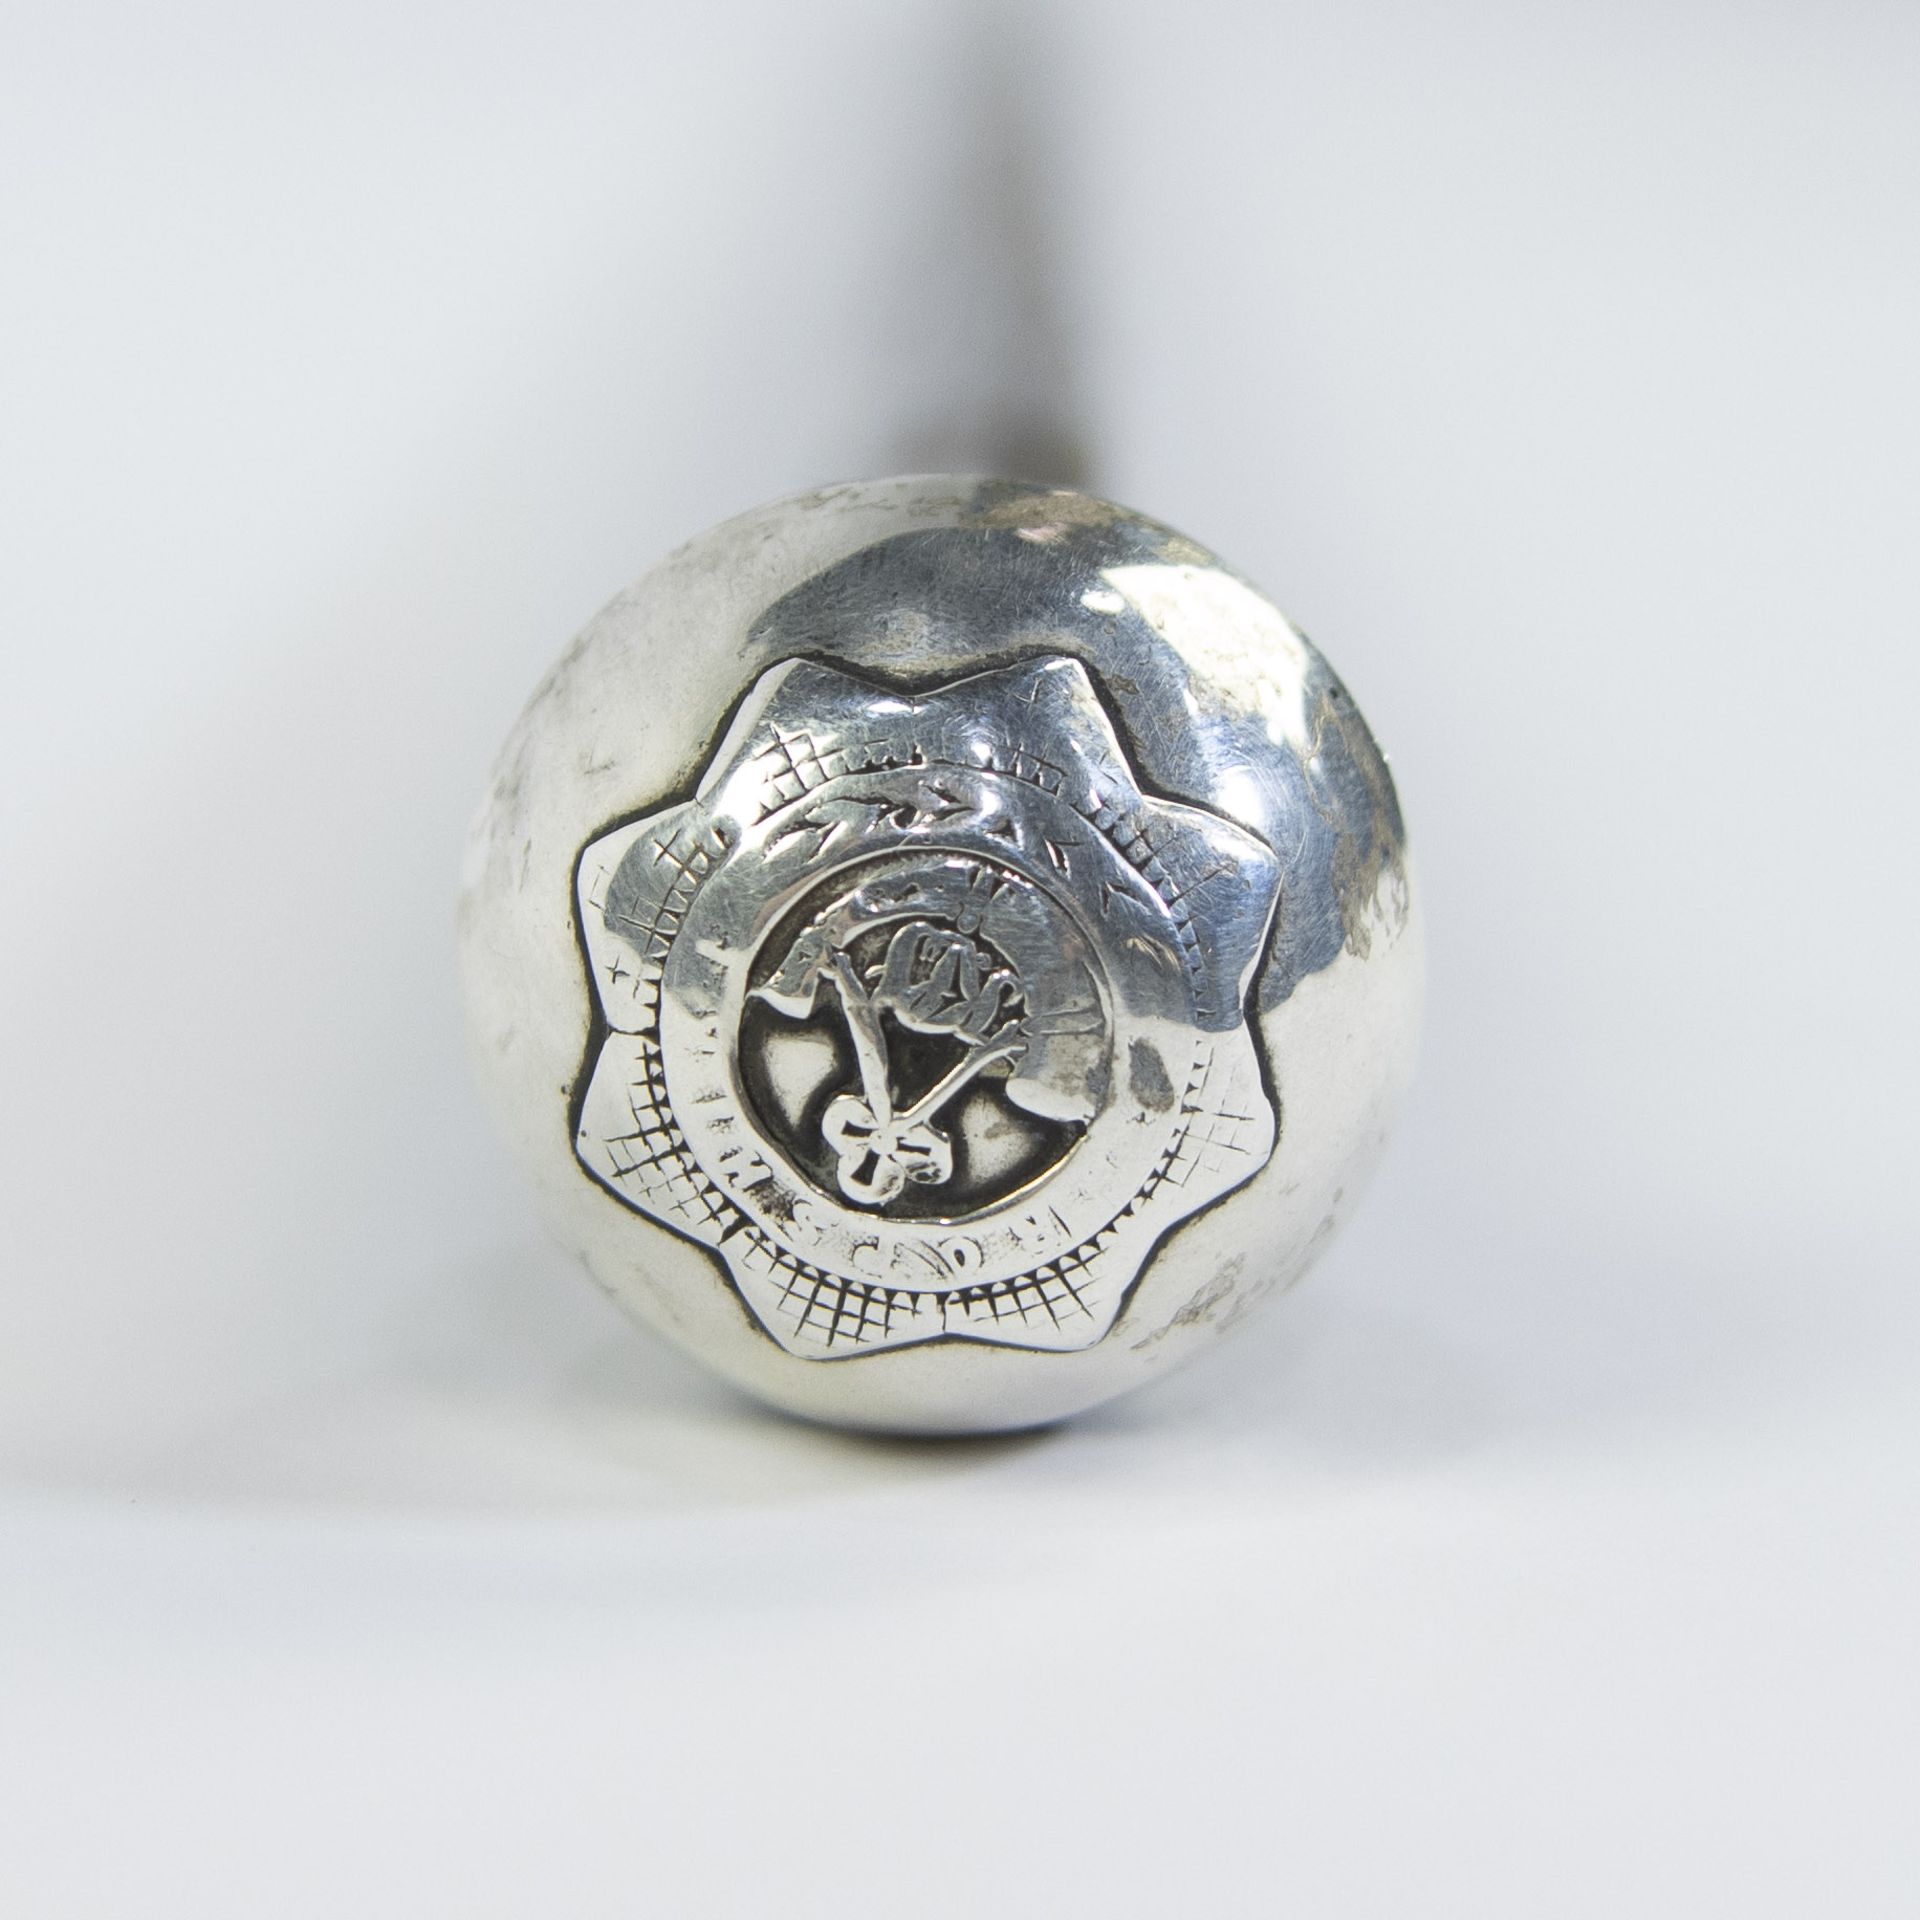 Walking stick with silver-plated knob with sign of the Lodge - Image 2 of 2